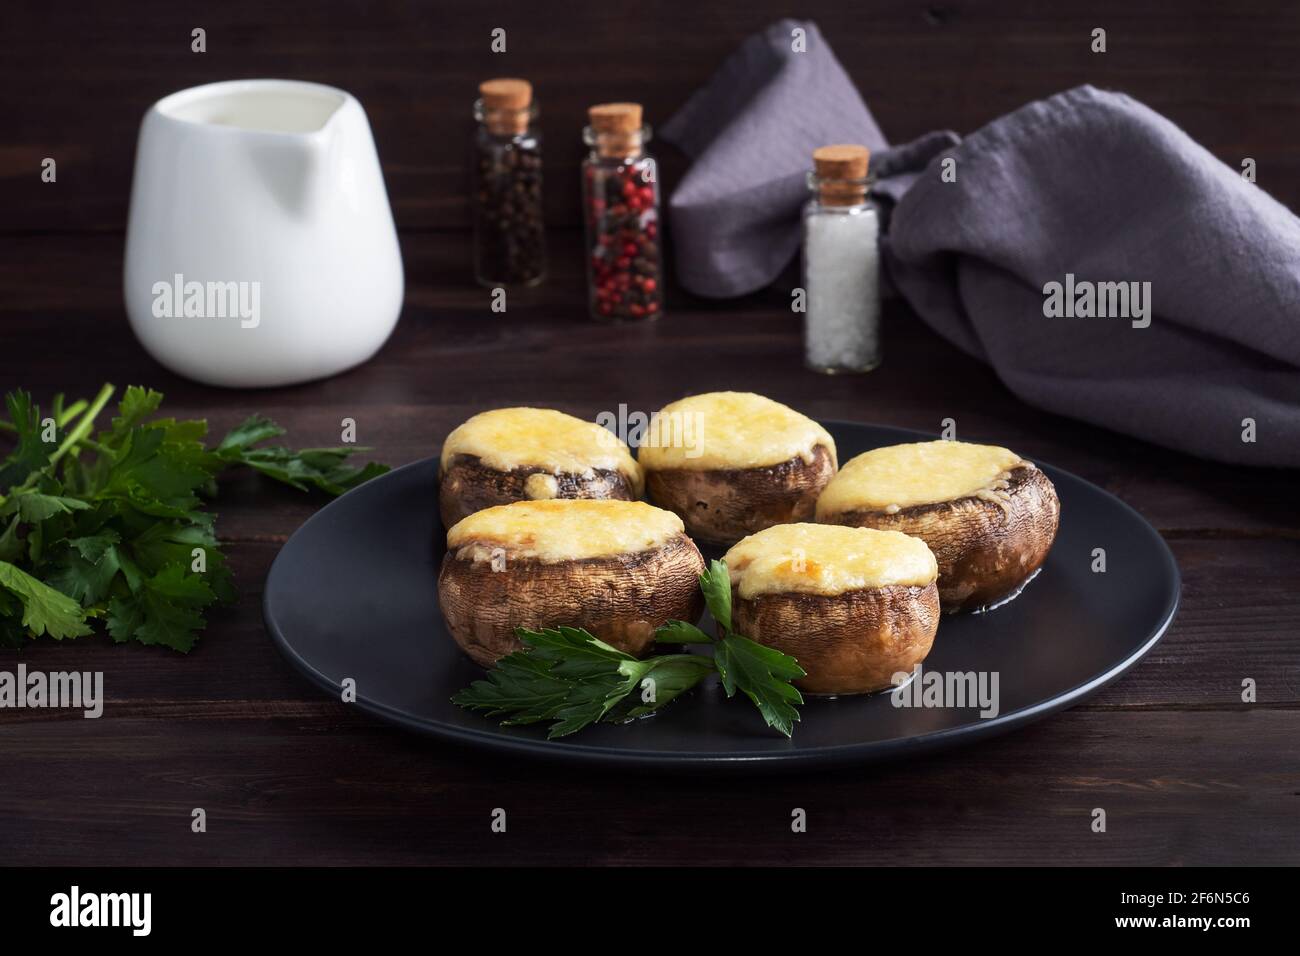 Baked mushrooms stuffed with cheese and herbs on a black plate. wooden background Stock Photo